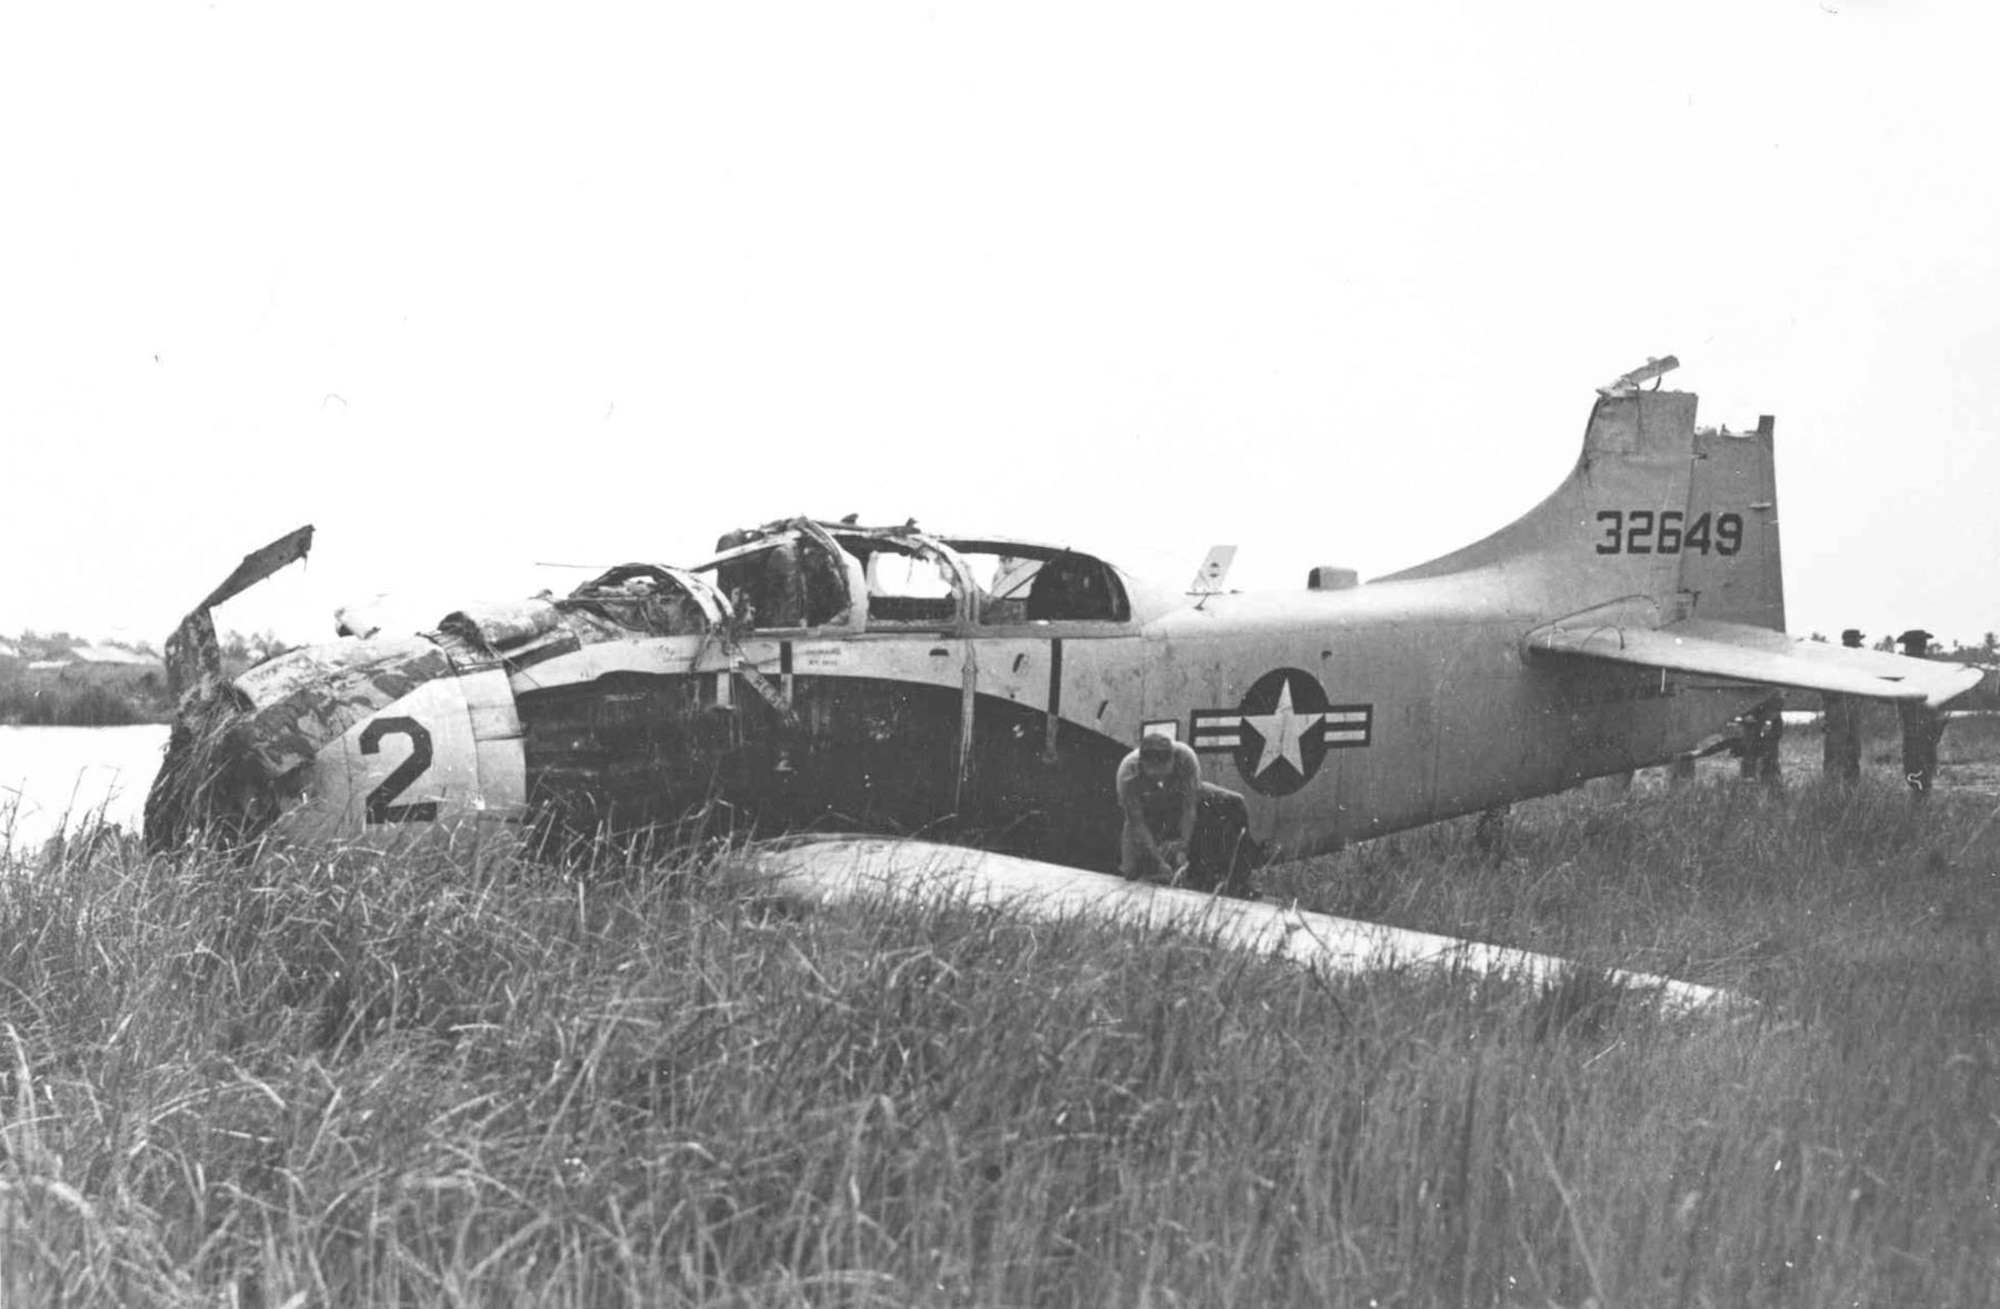 This Douglas A-1E was severely damaged in combat in South Vietnam. It is the aircraft that was flown by Maj. Bernard Fisher on March 10, 1966, when he rescued a fellow pilot shot down over South Vietnam, a deed for which he was awarded the Medal of Honor. The aircraft was restored and is currently on display at the National Museum of the United States Air Force. (U.S. Air Force photo)